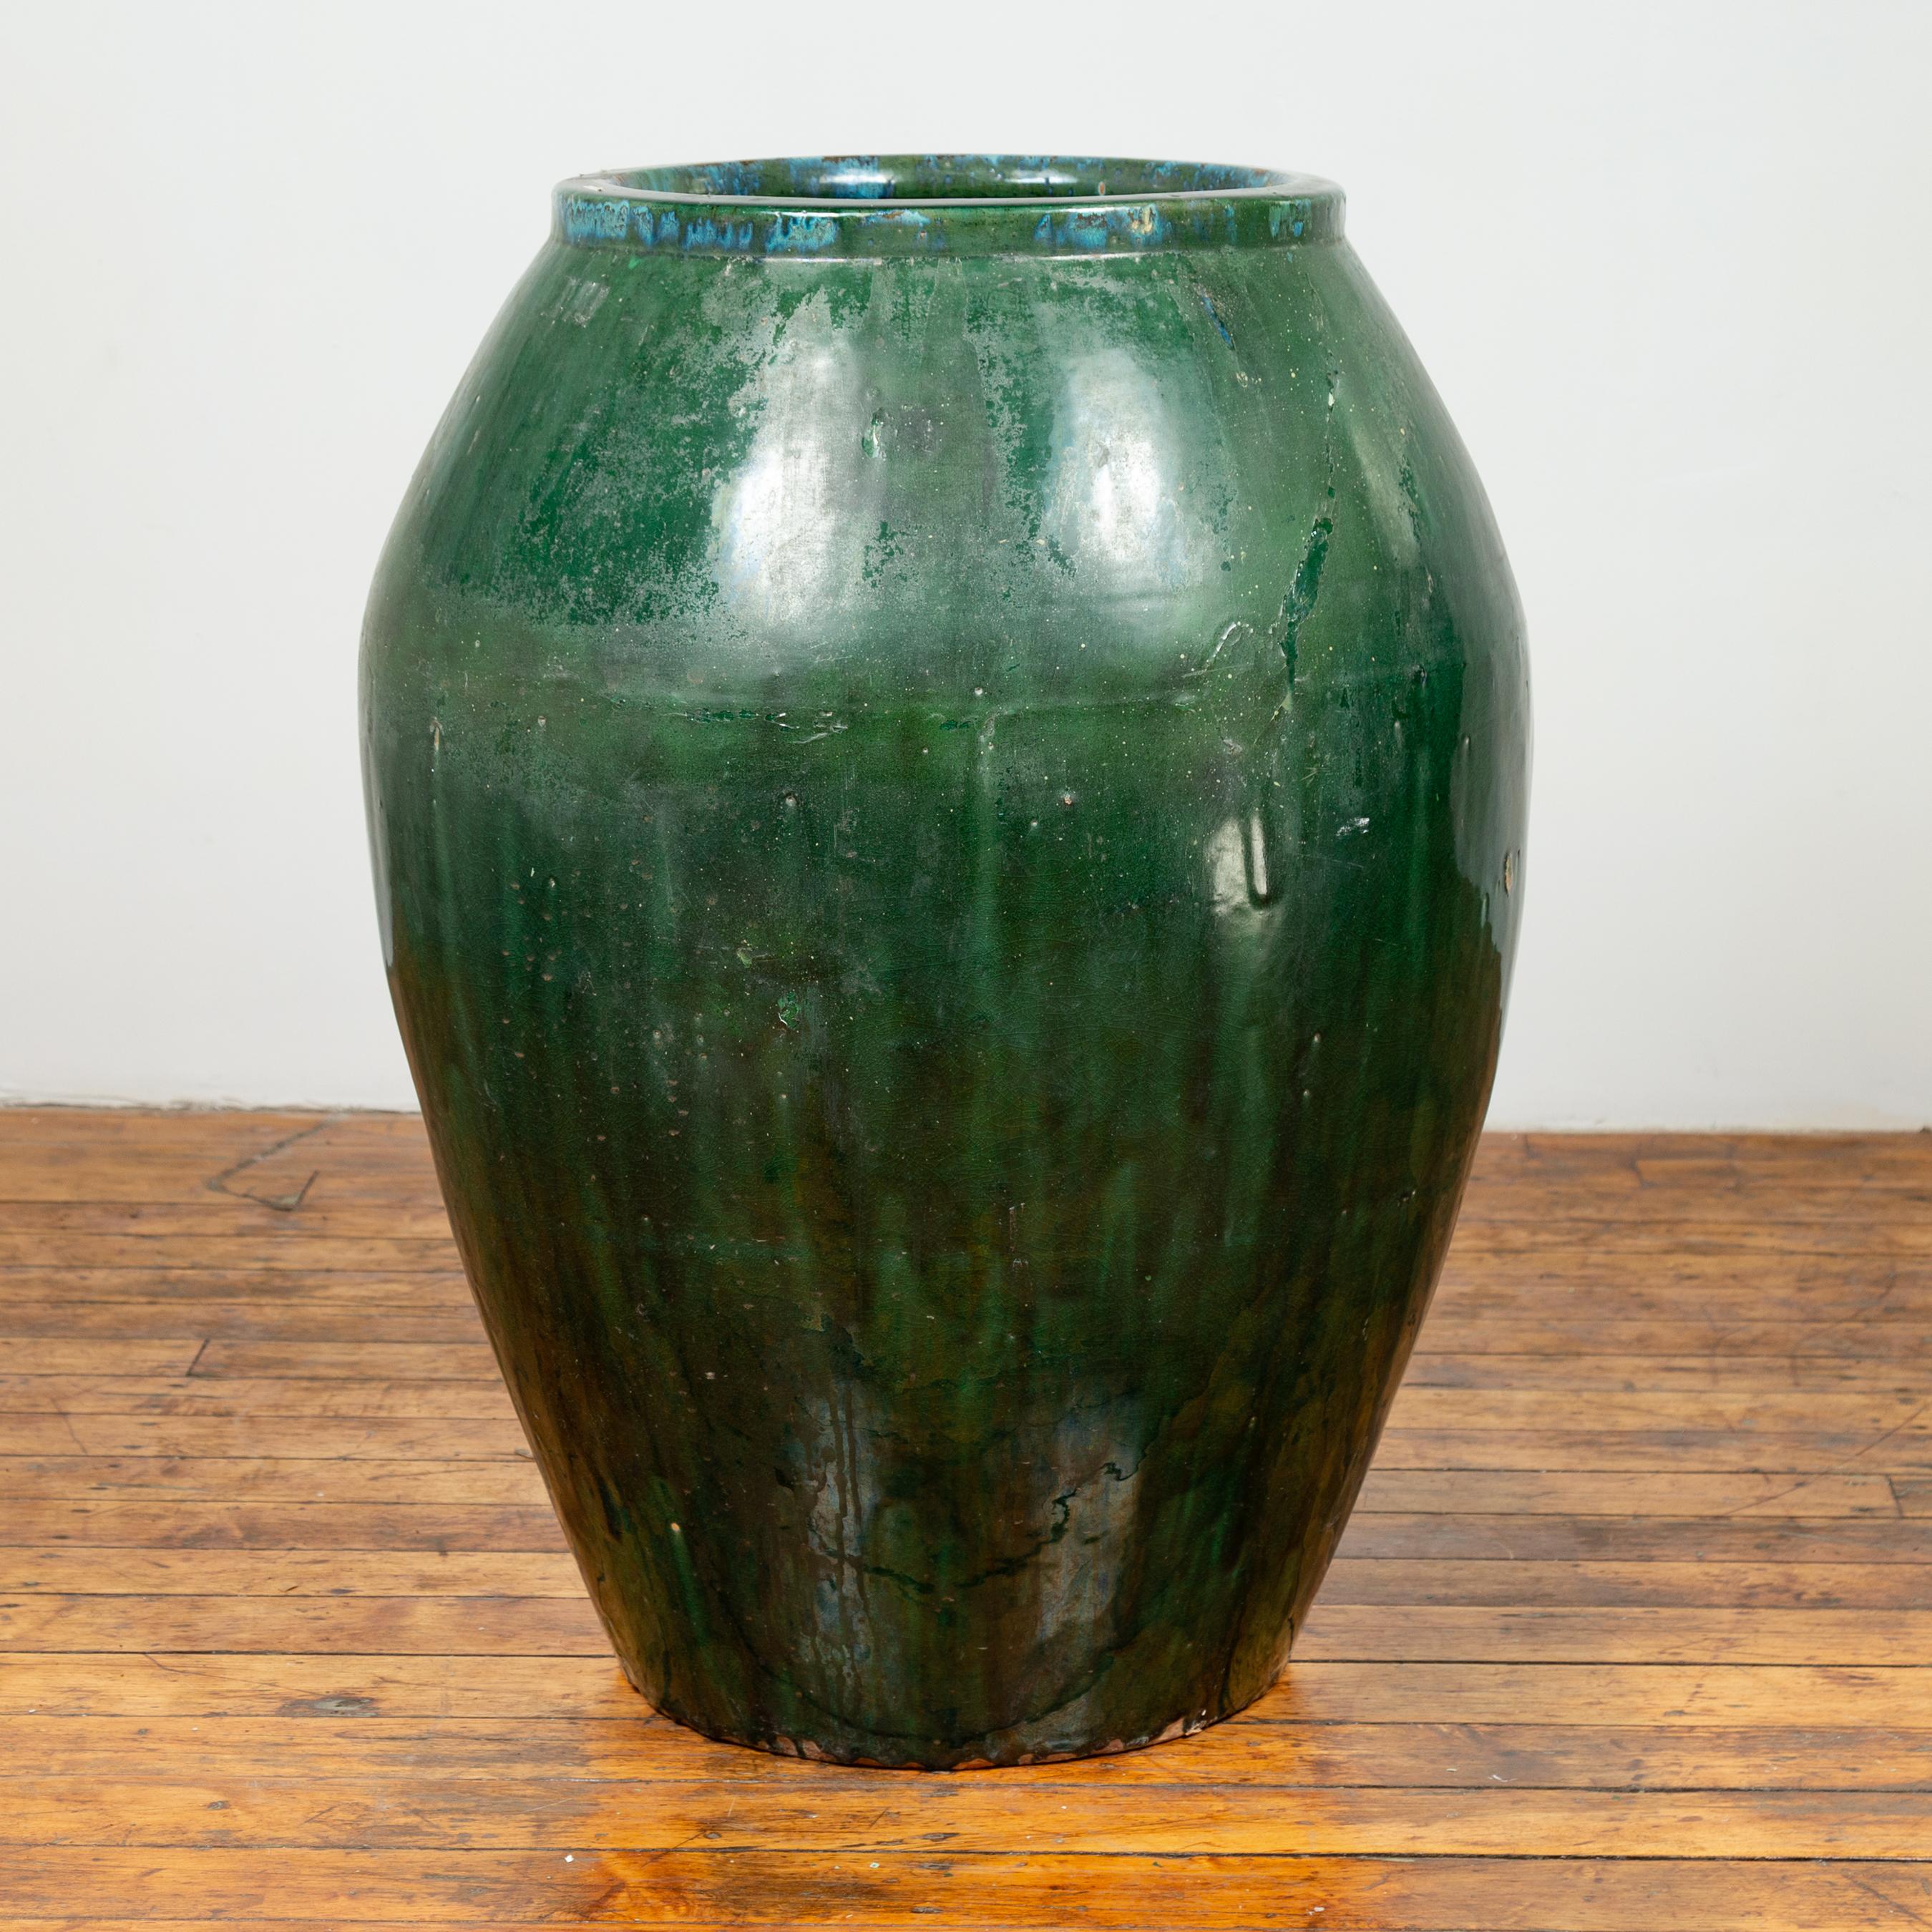 A large Asian green glazed ceramic jar from the early 20th century with nicely weathered appearance. Charming us with its large proportions and slightly weathered appearance revealing its age and use, this green glazed ceramic jar features a narrow